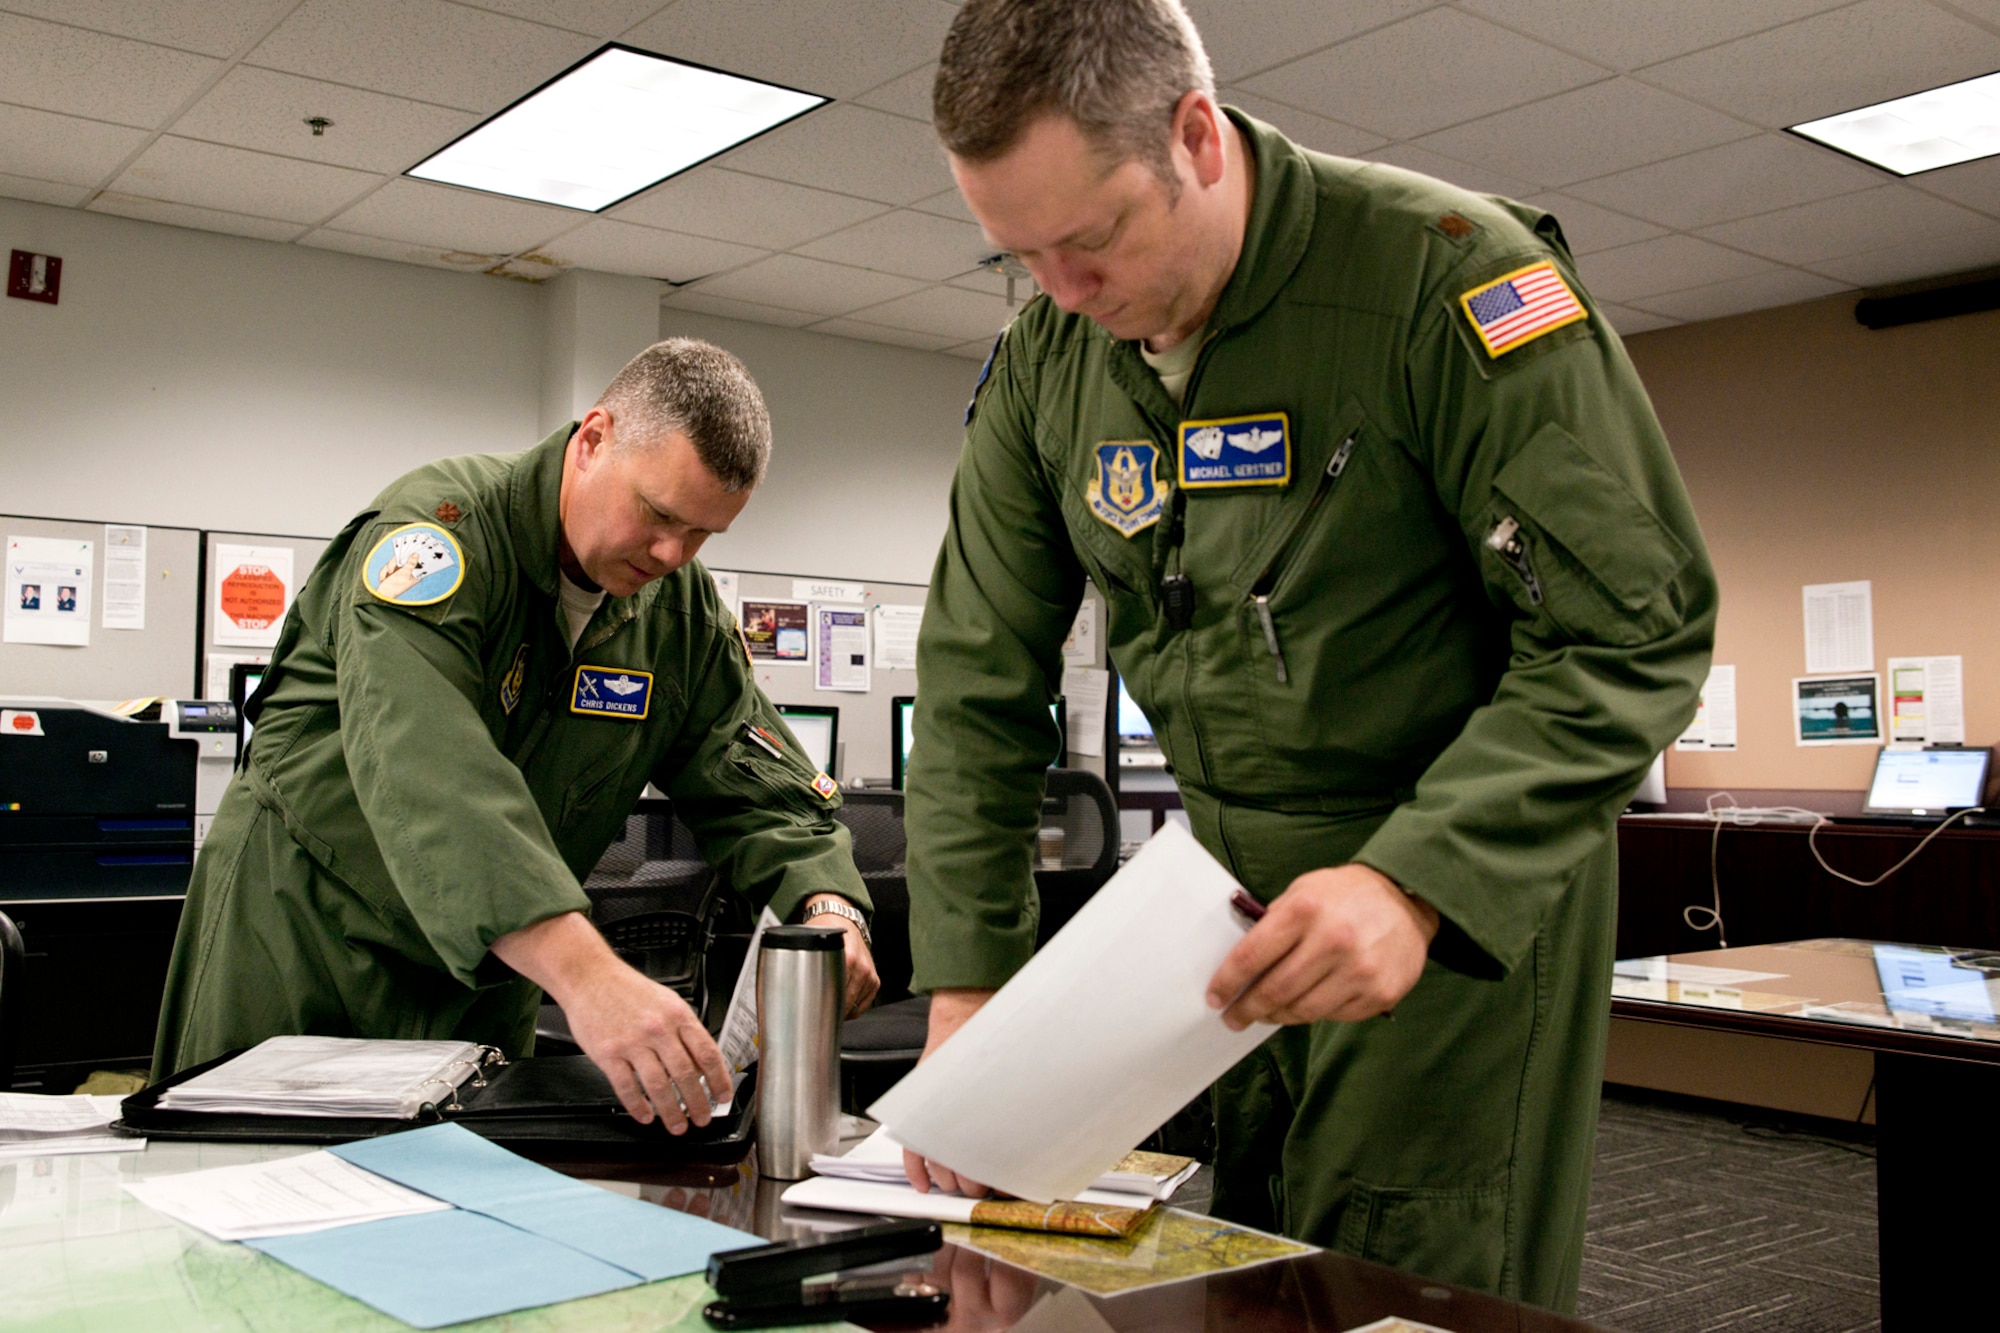 U.S. Air Force Reserve Majs. Chris Dickens and Mike Gerstner, get their paperwork together before a pre-fight briefing at Little Rock Air Force Base, Ark., May 13, 2016. Both Airmen are pilots assigned to the 327th Airlift Squadron and were part of the first C-130J mission flown by an all Reserve aircrew from the 913th Airlift Group since the group’s transition from the “H” to the “J” model. (U.S. Air Force photo by Master Sgt. Jeff Walston/Released)